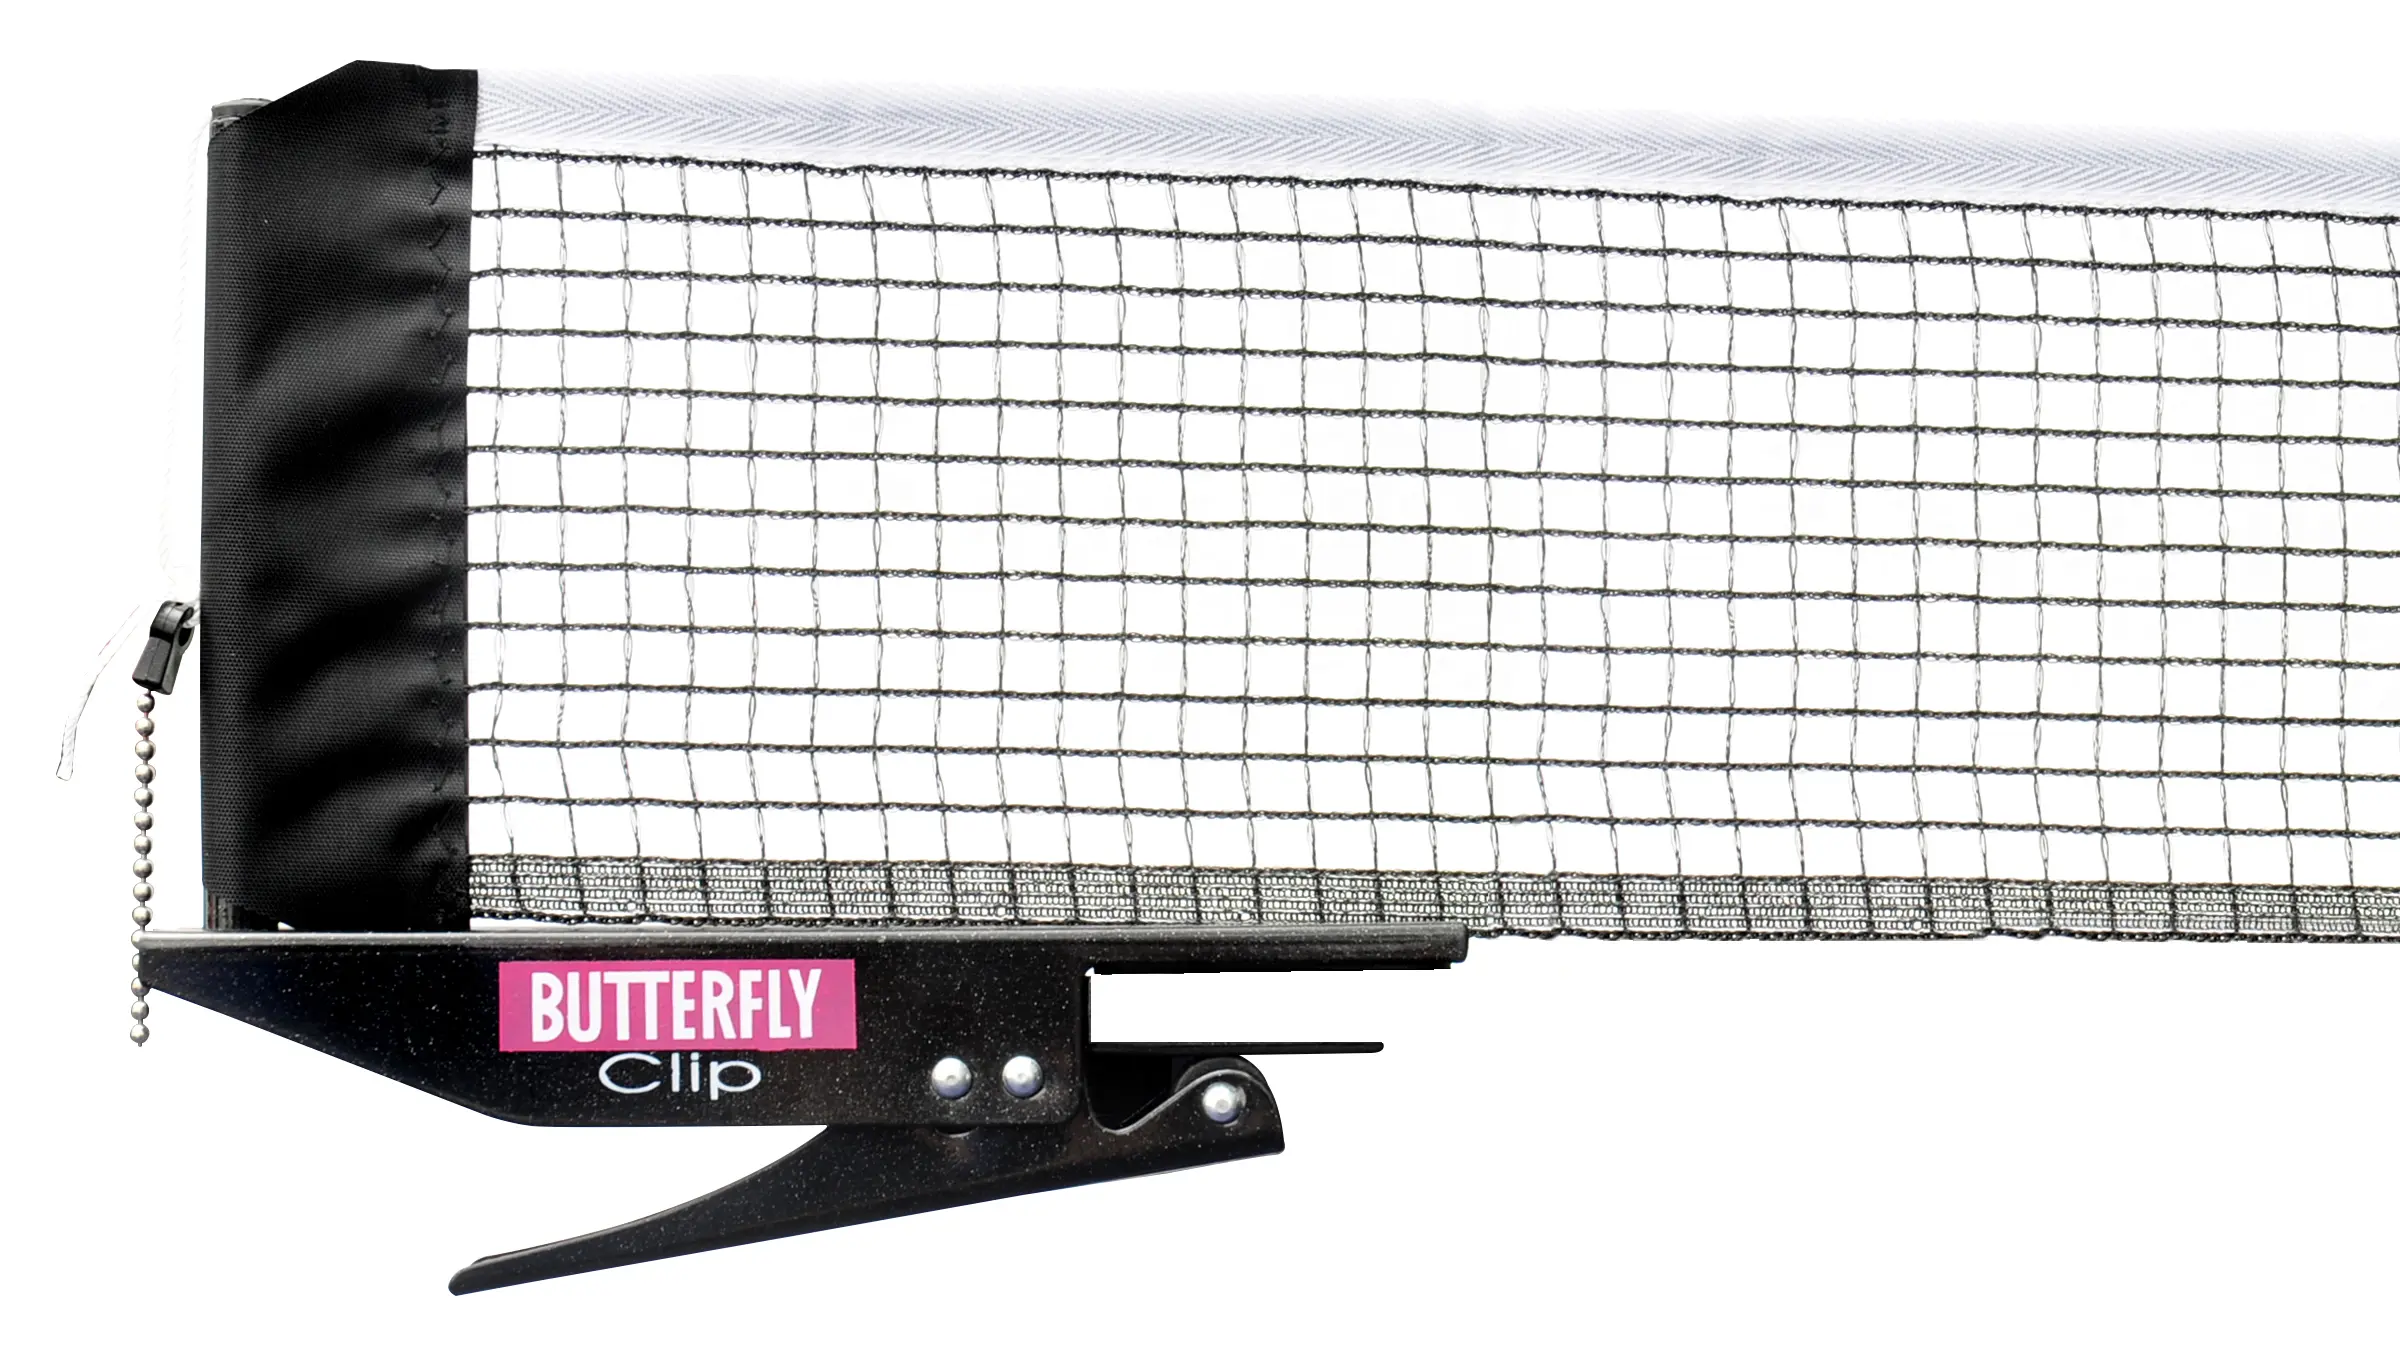 Butterfly Garden 6000 Grey Outdoor Rollaway Table Tennis Table image thumbnail